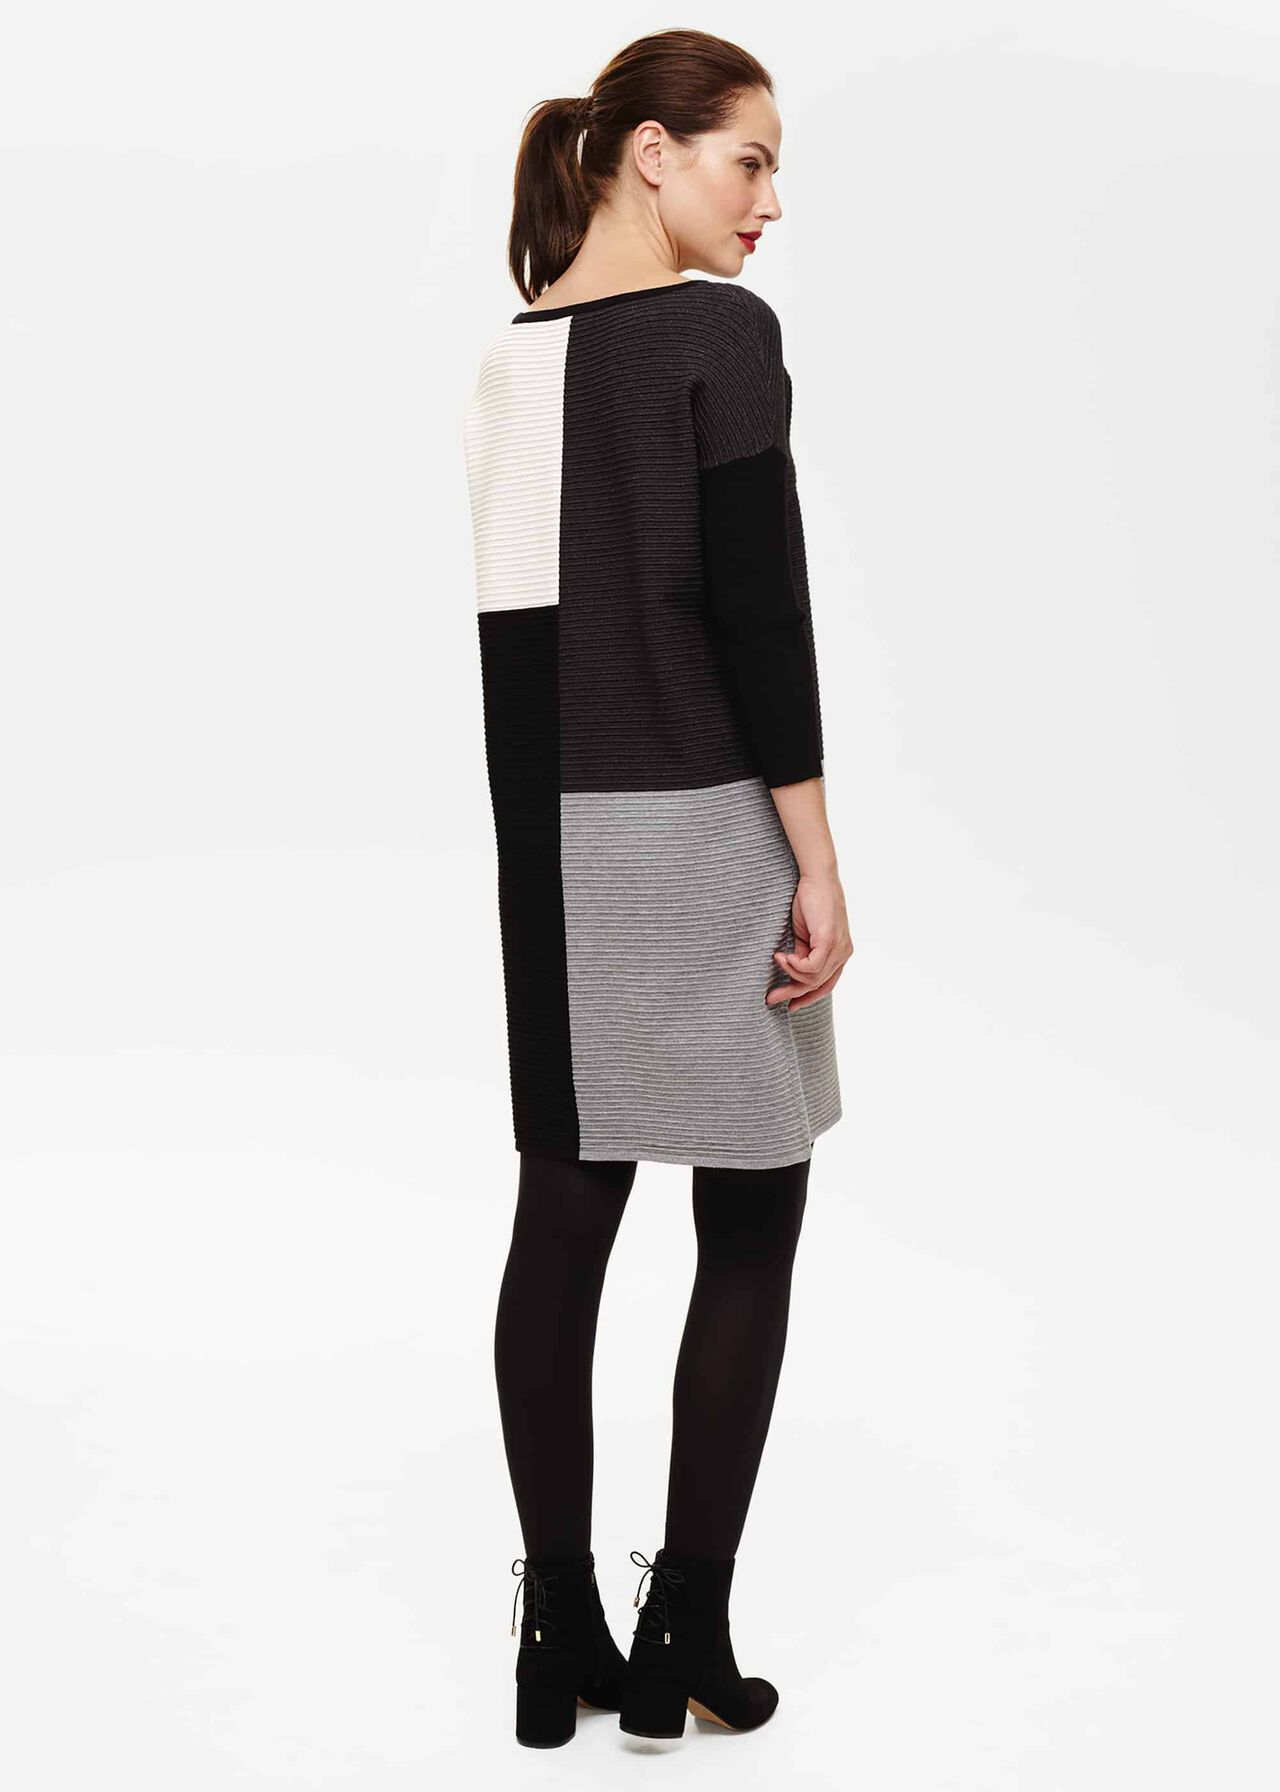 Cher Colour Block Knitted Dress